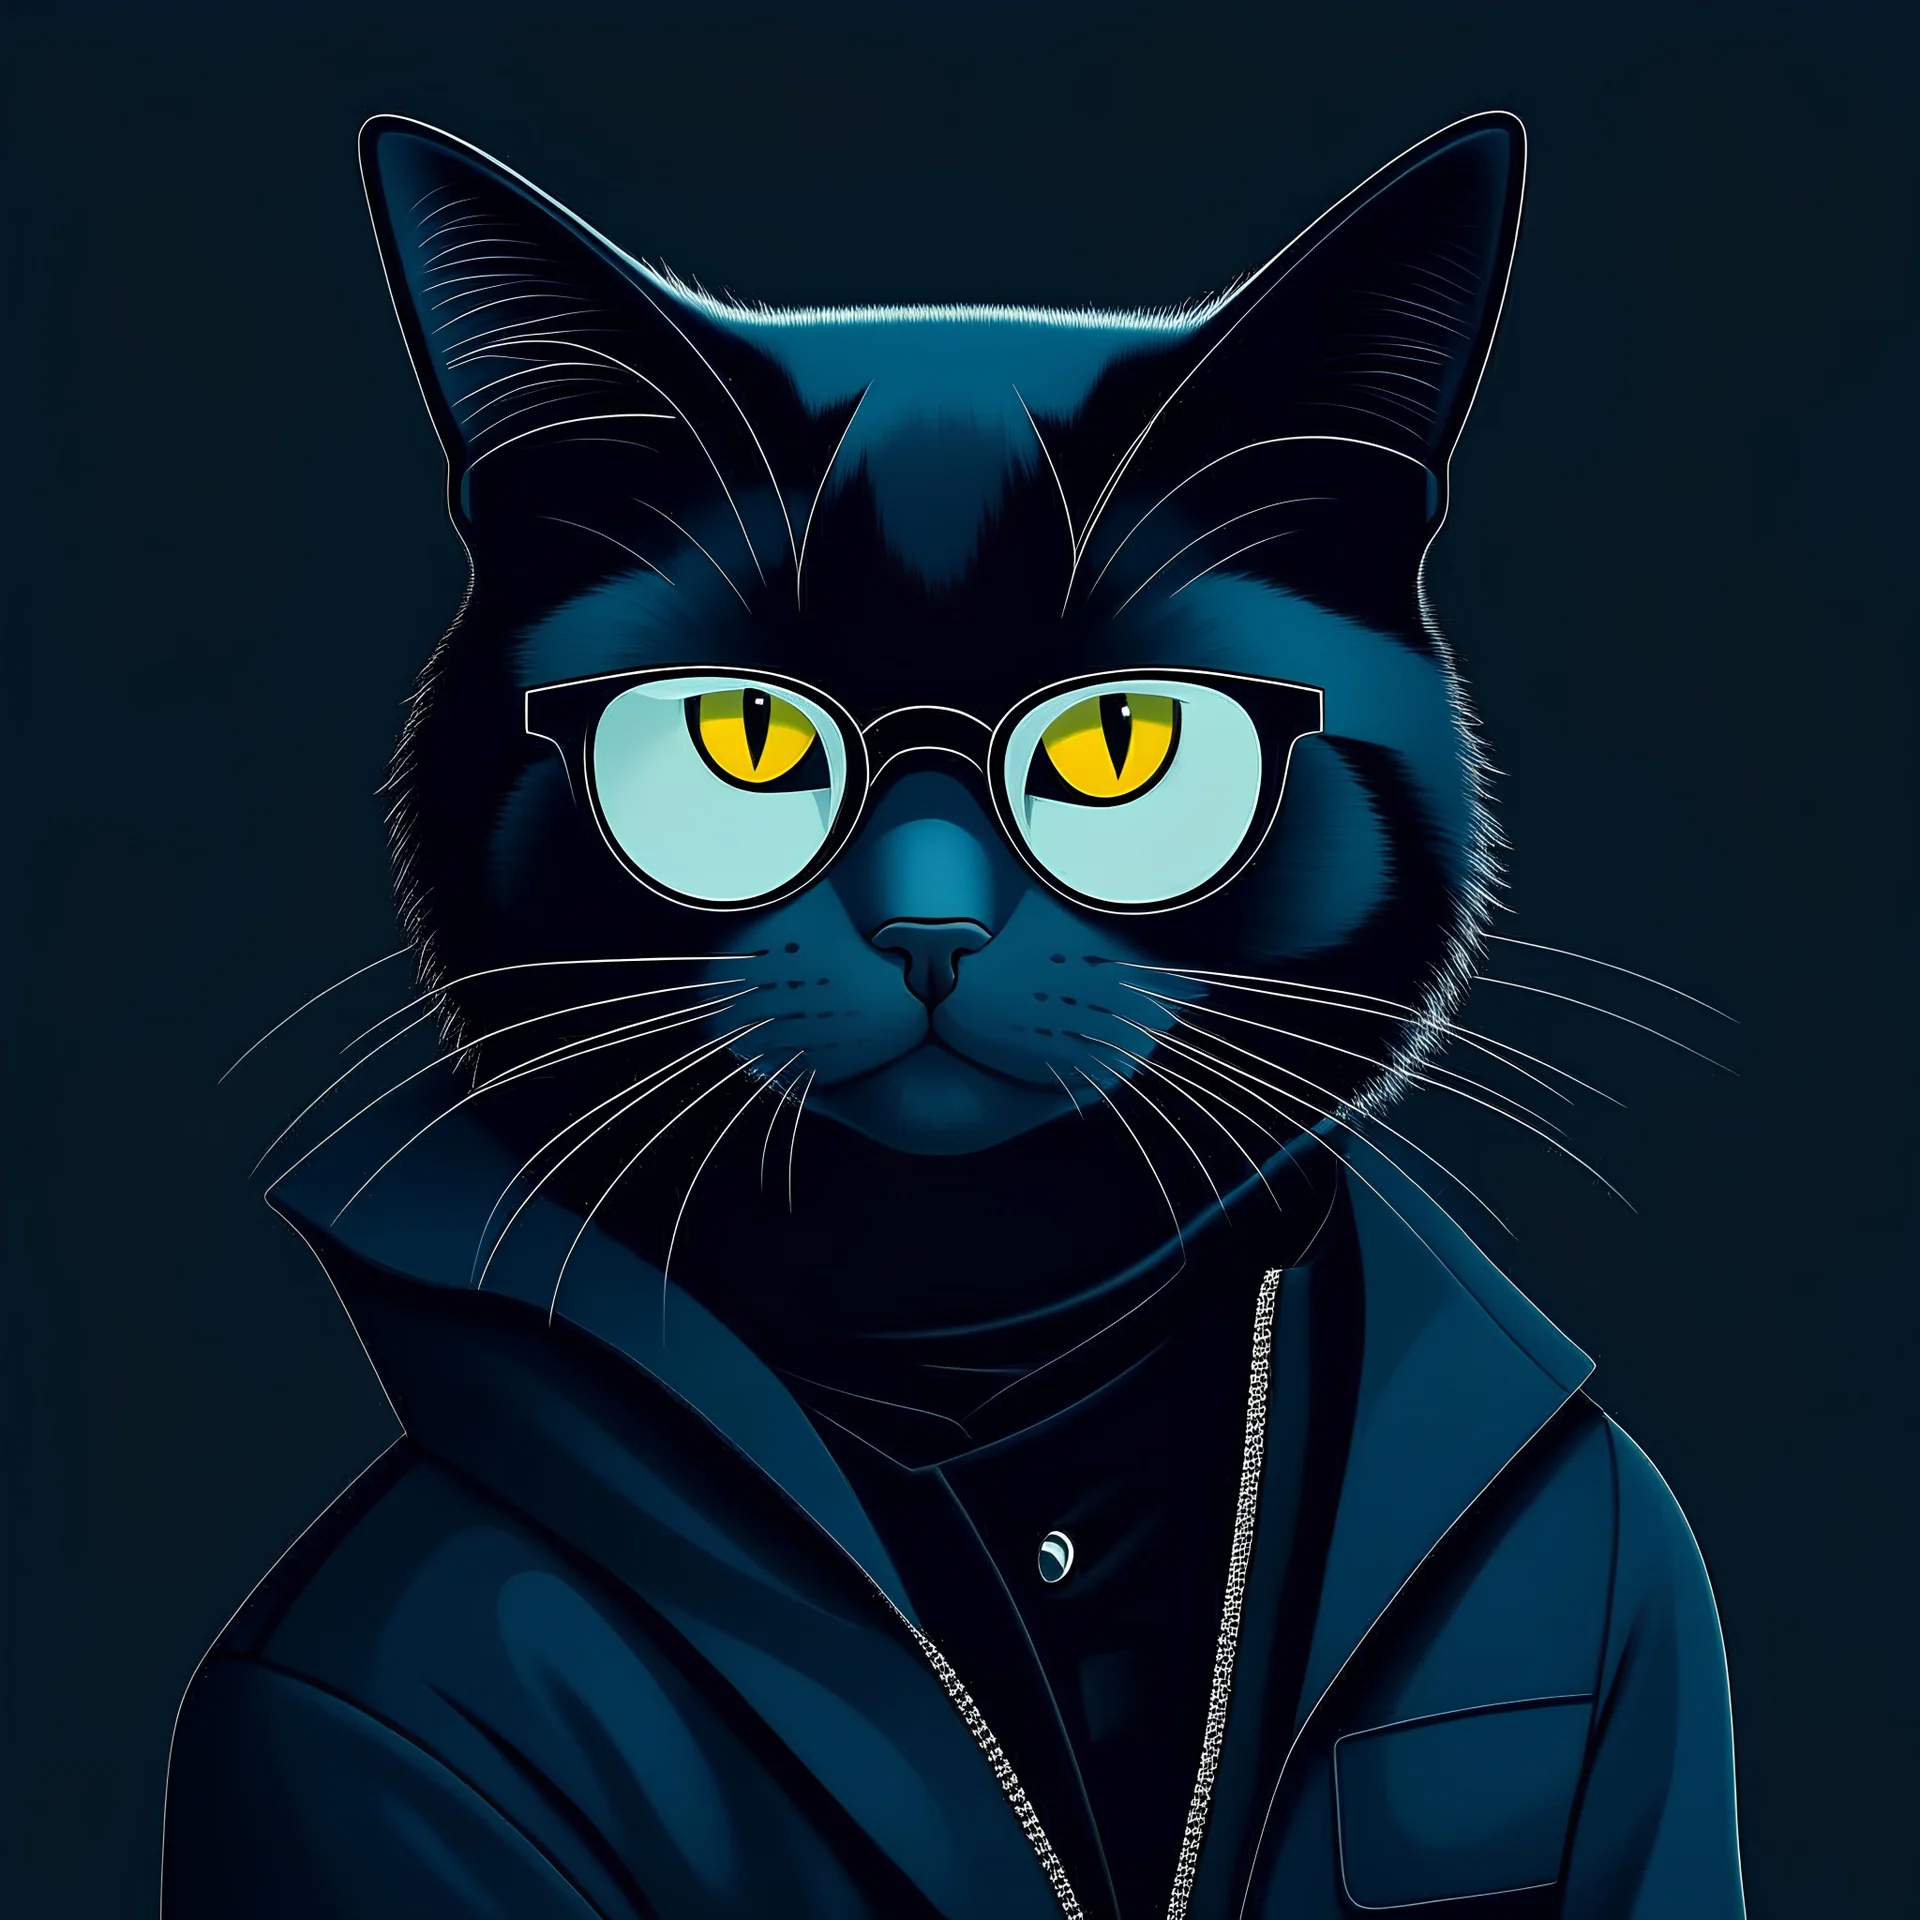 Drawing of a cat with black jacket and glasses NFT style